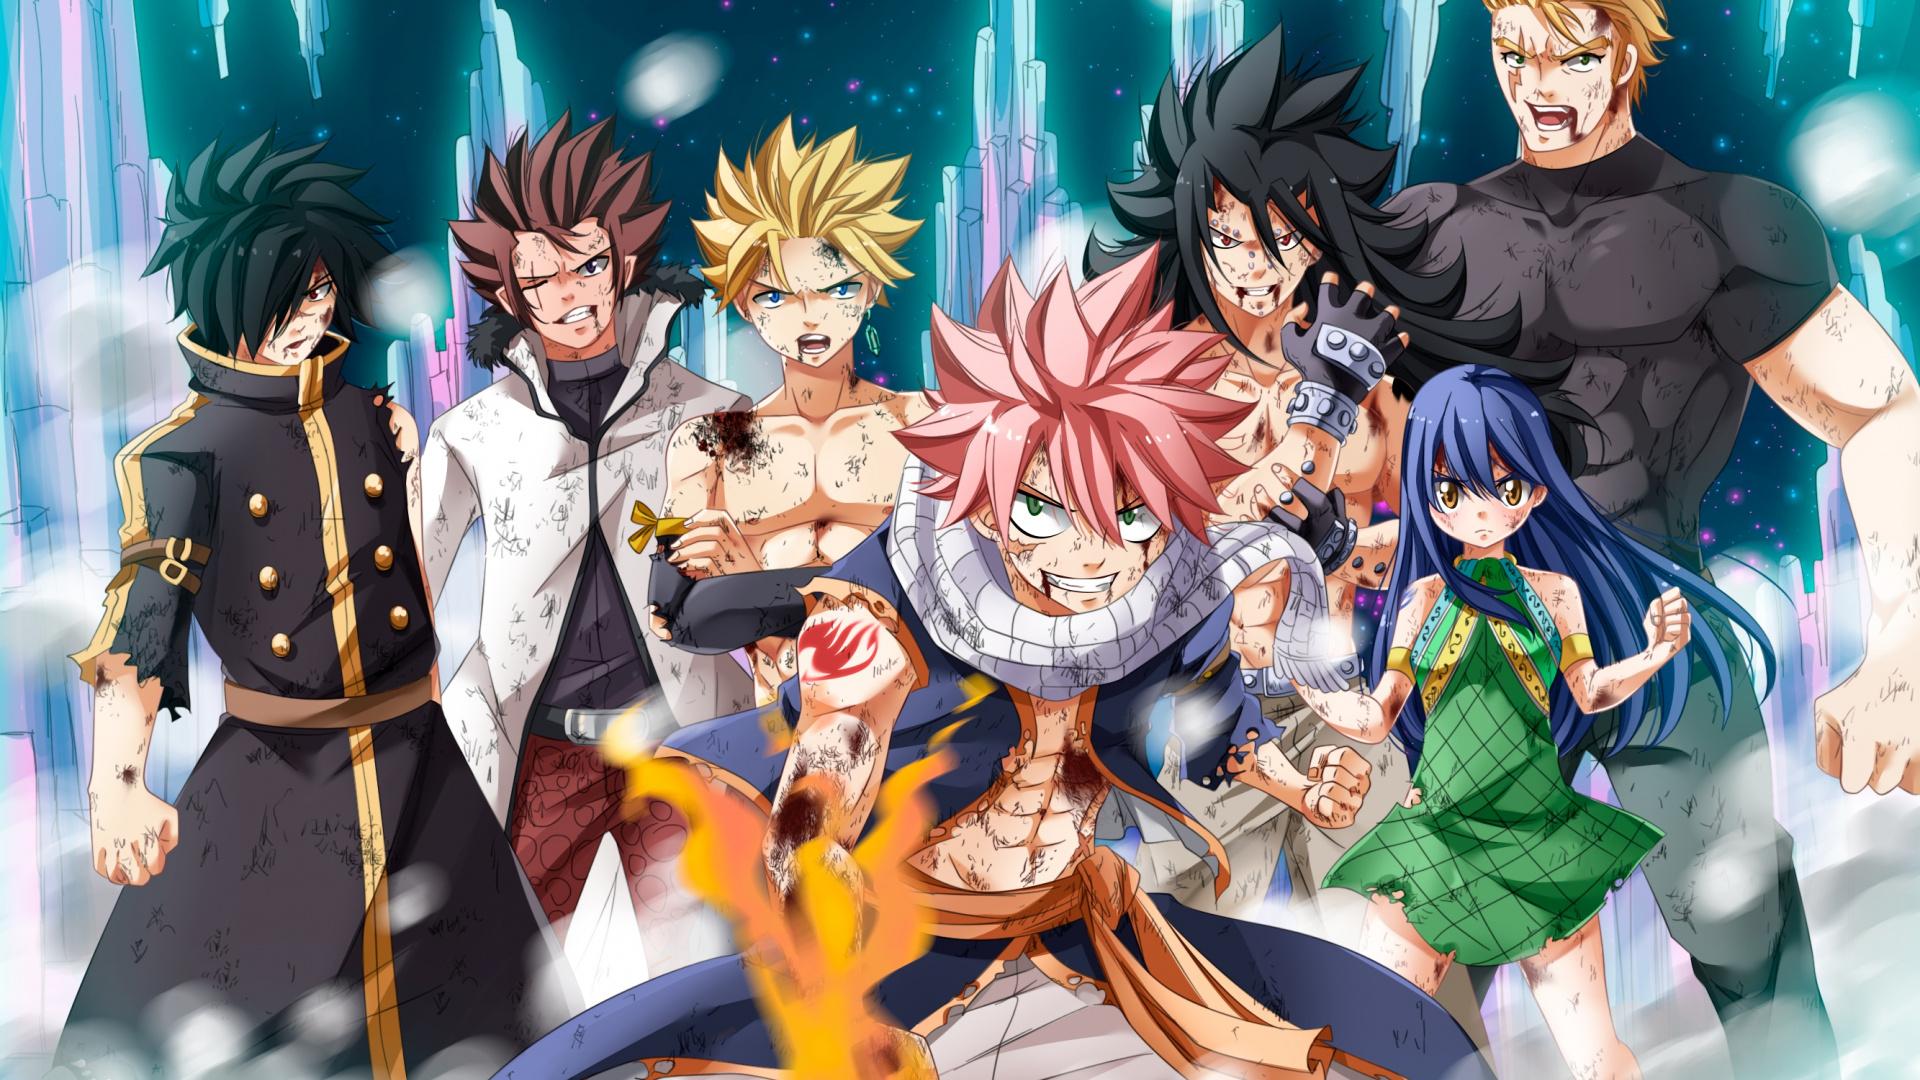 Download Anime, lead characters, Fairy Tail wallpaper, 1920x1080